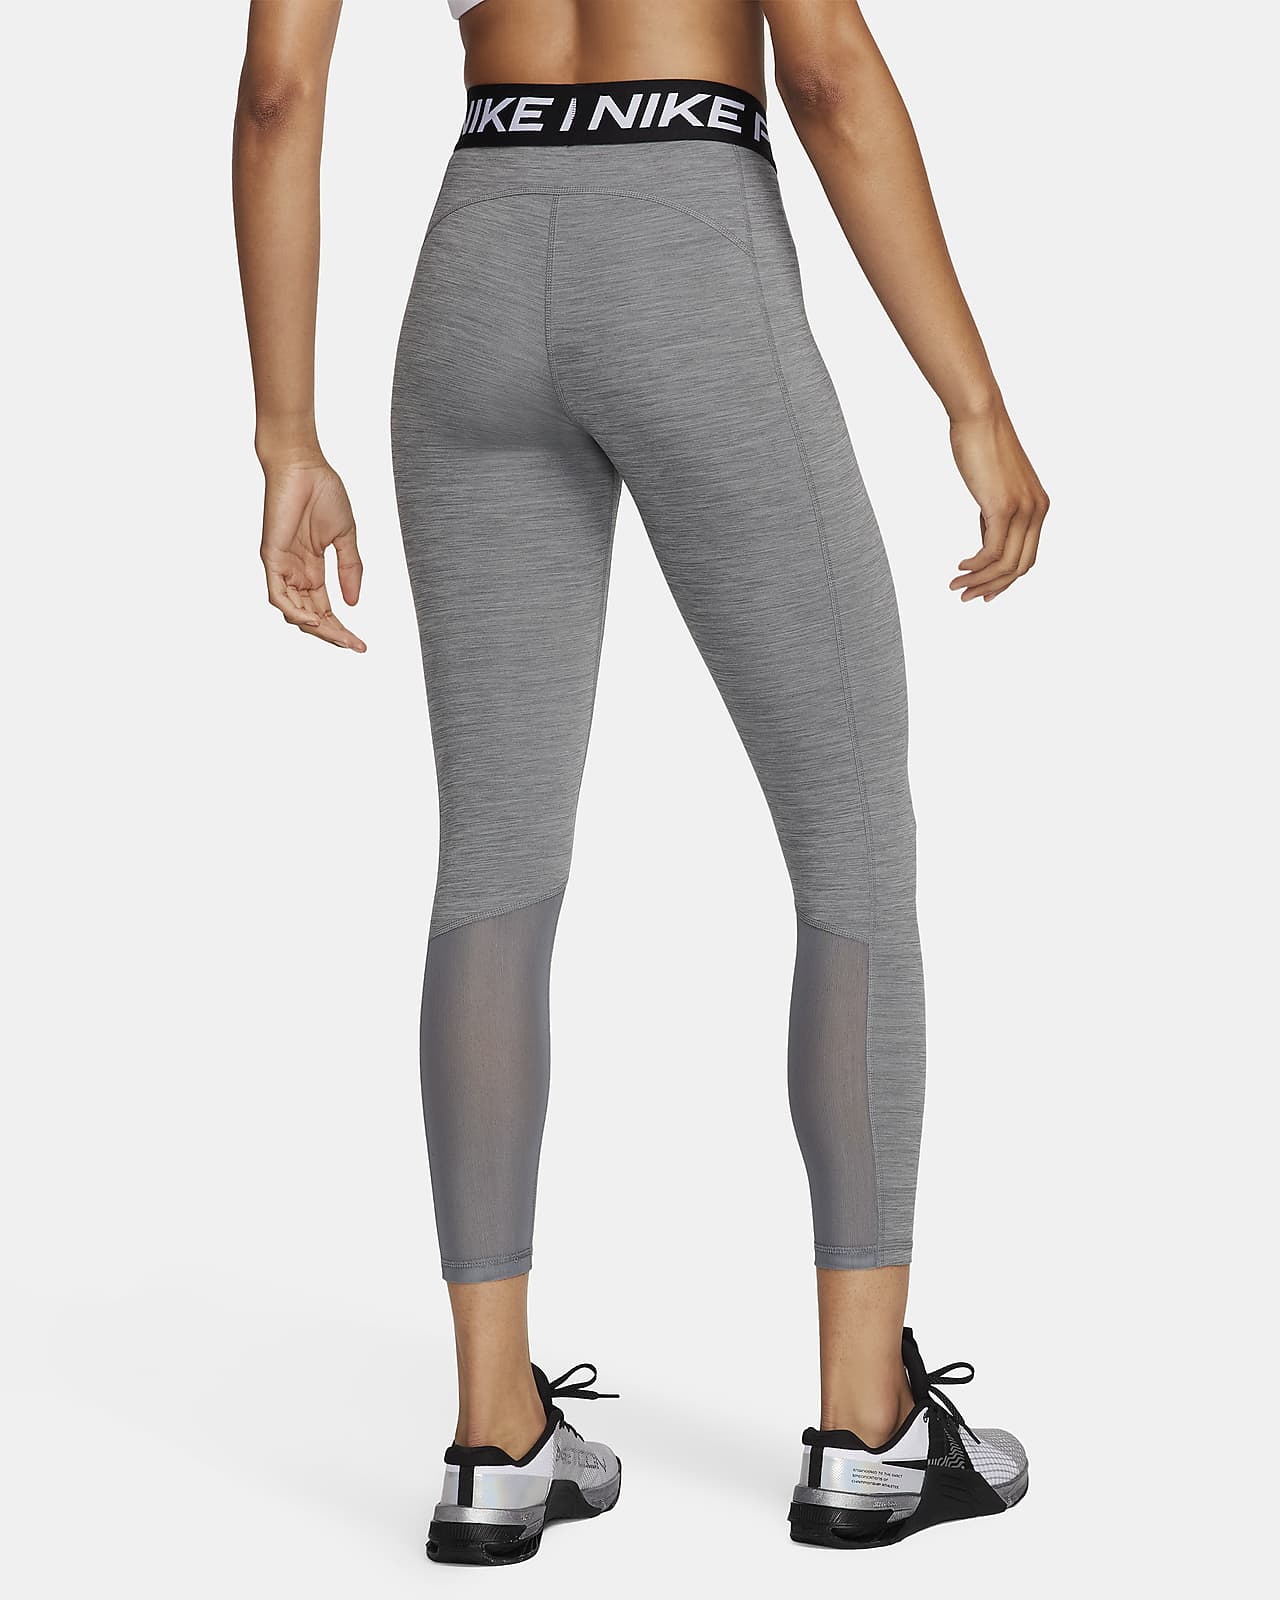 Nike leggings mid-rise NWT size small - $35 New With Tags - From